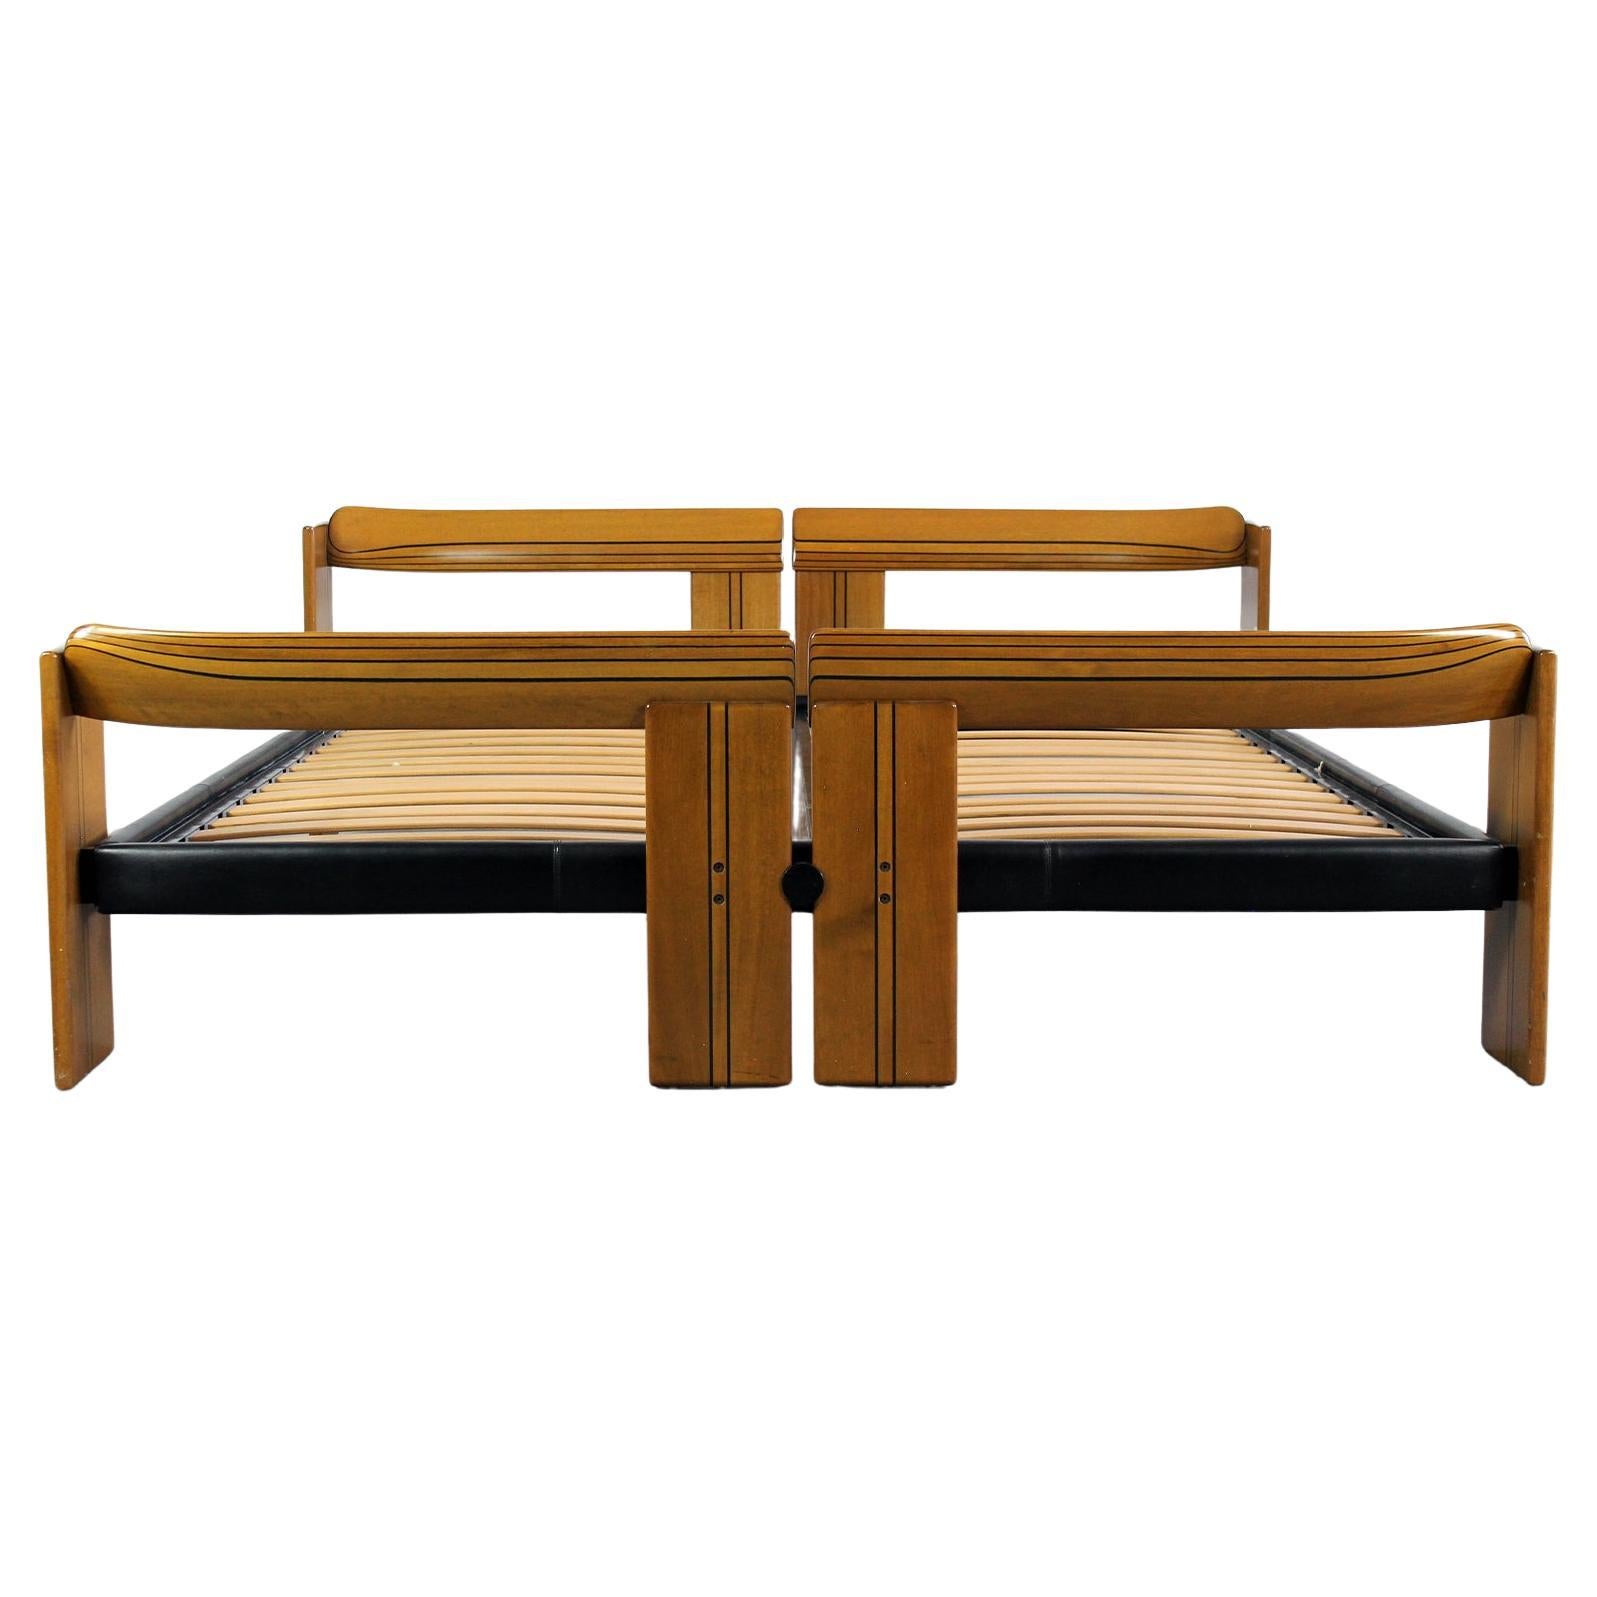 Tobia & Afra Scarpa Artona Bed Frame in Walnut and Leather by Maxalto 1970s  For Sale